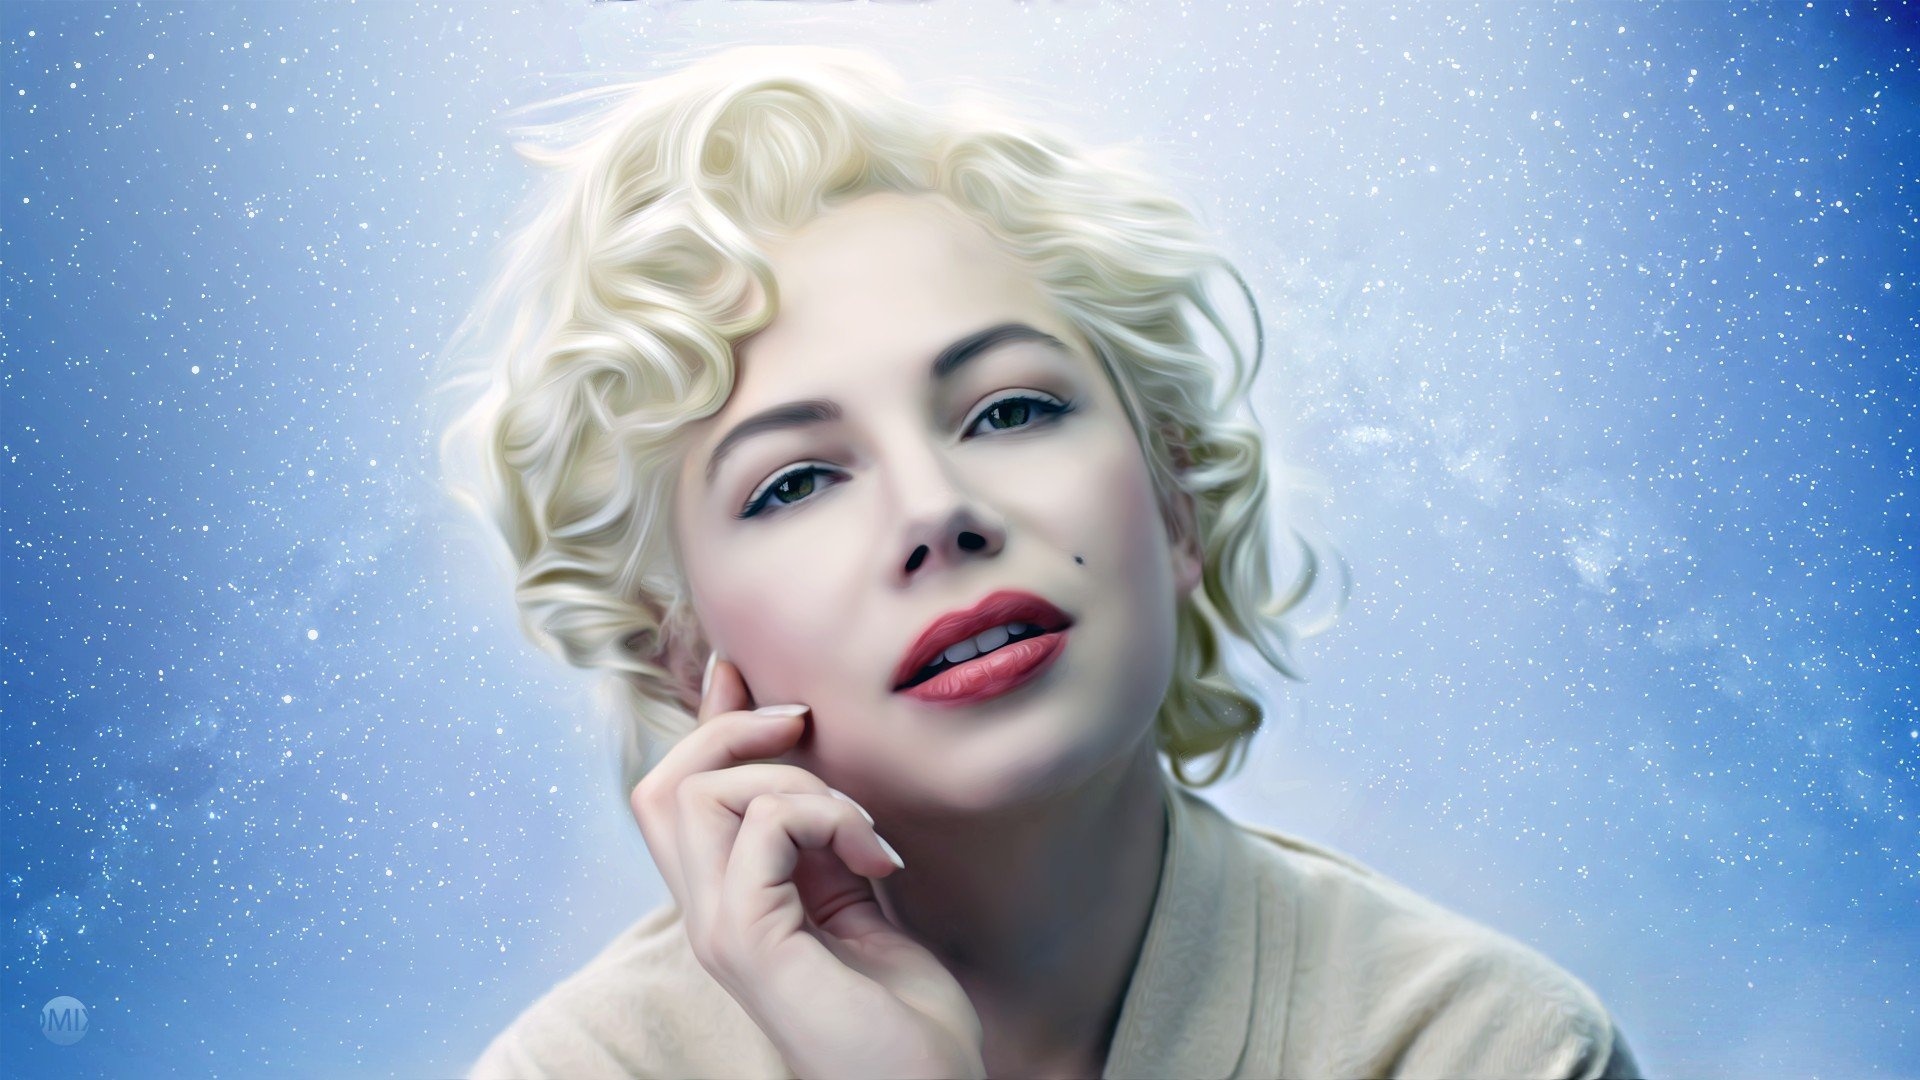 Michelle Williams, Widescreen wallpapers, High-definition images, Computer background, 1920x1080 Full HD Desktop